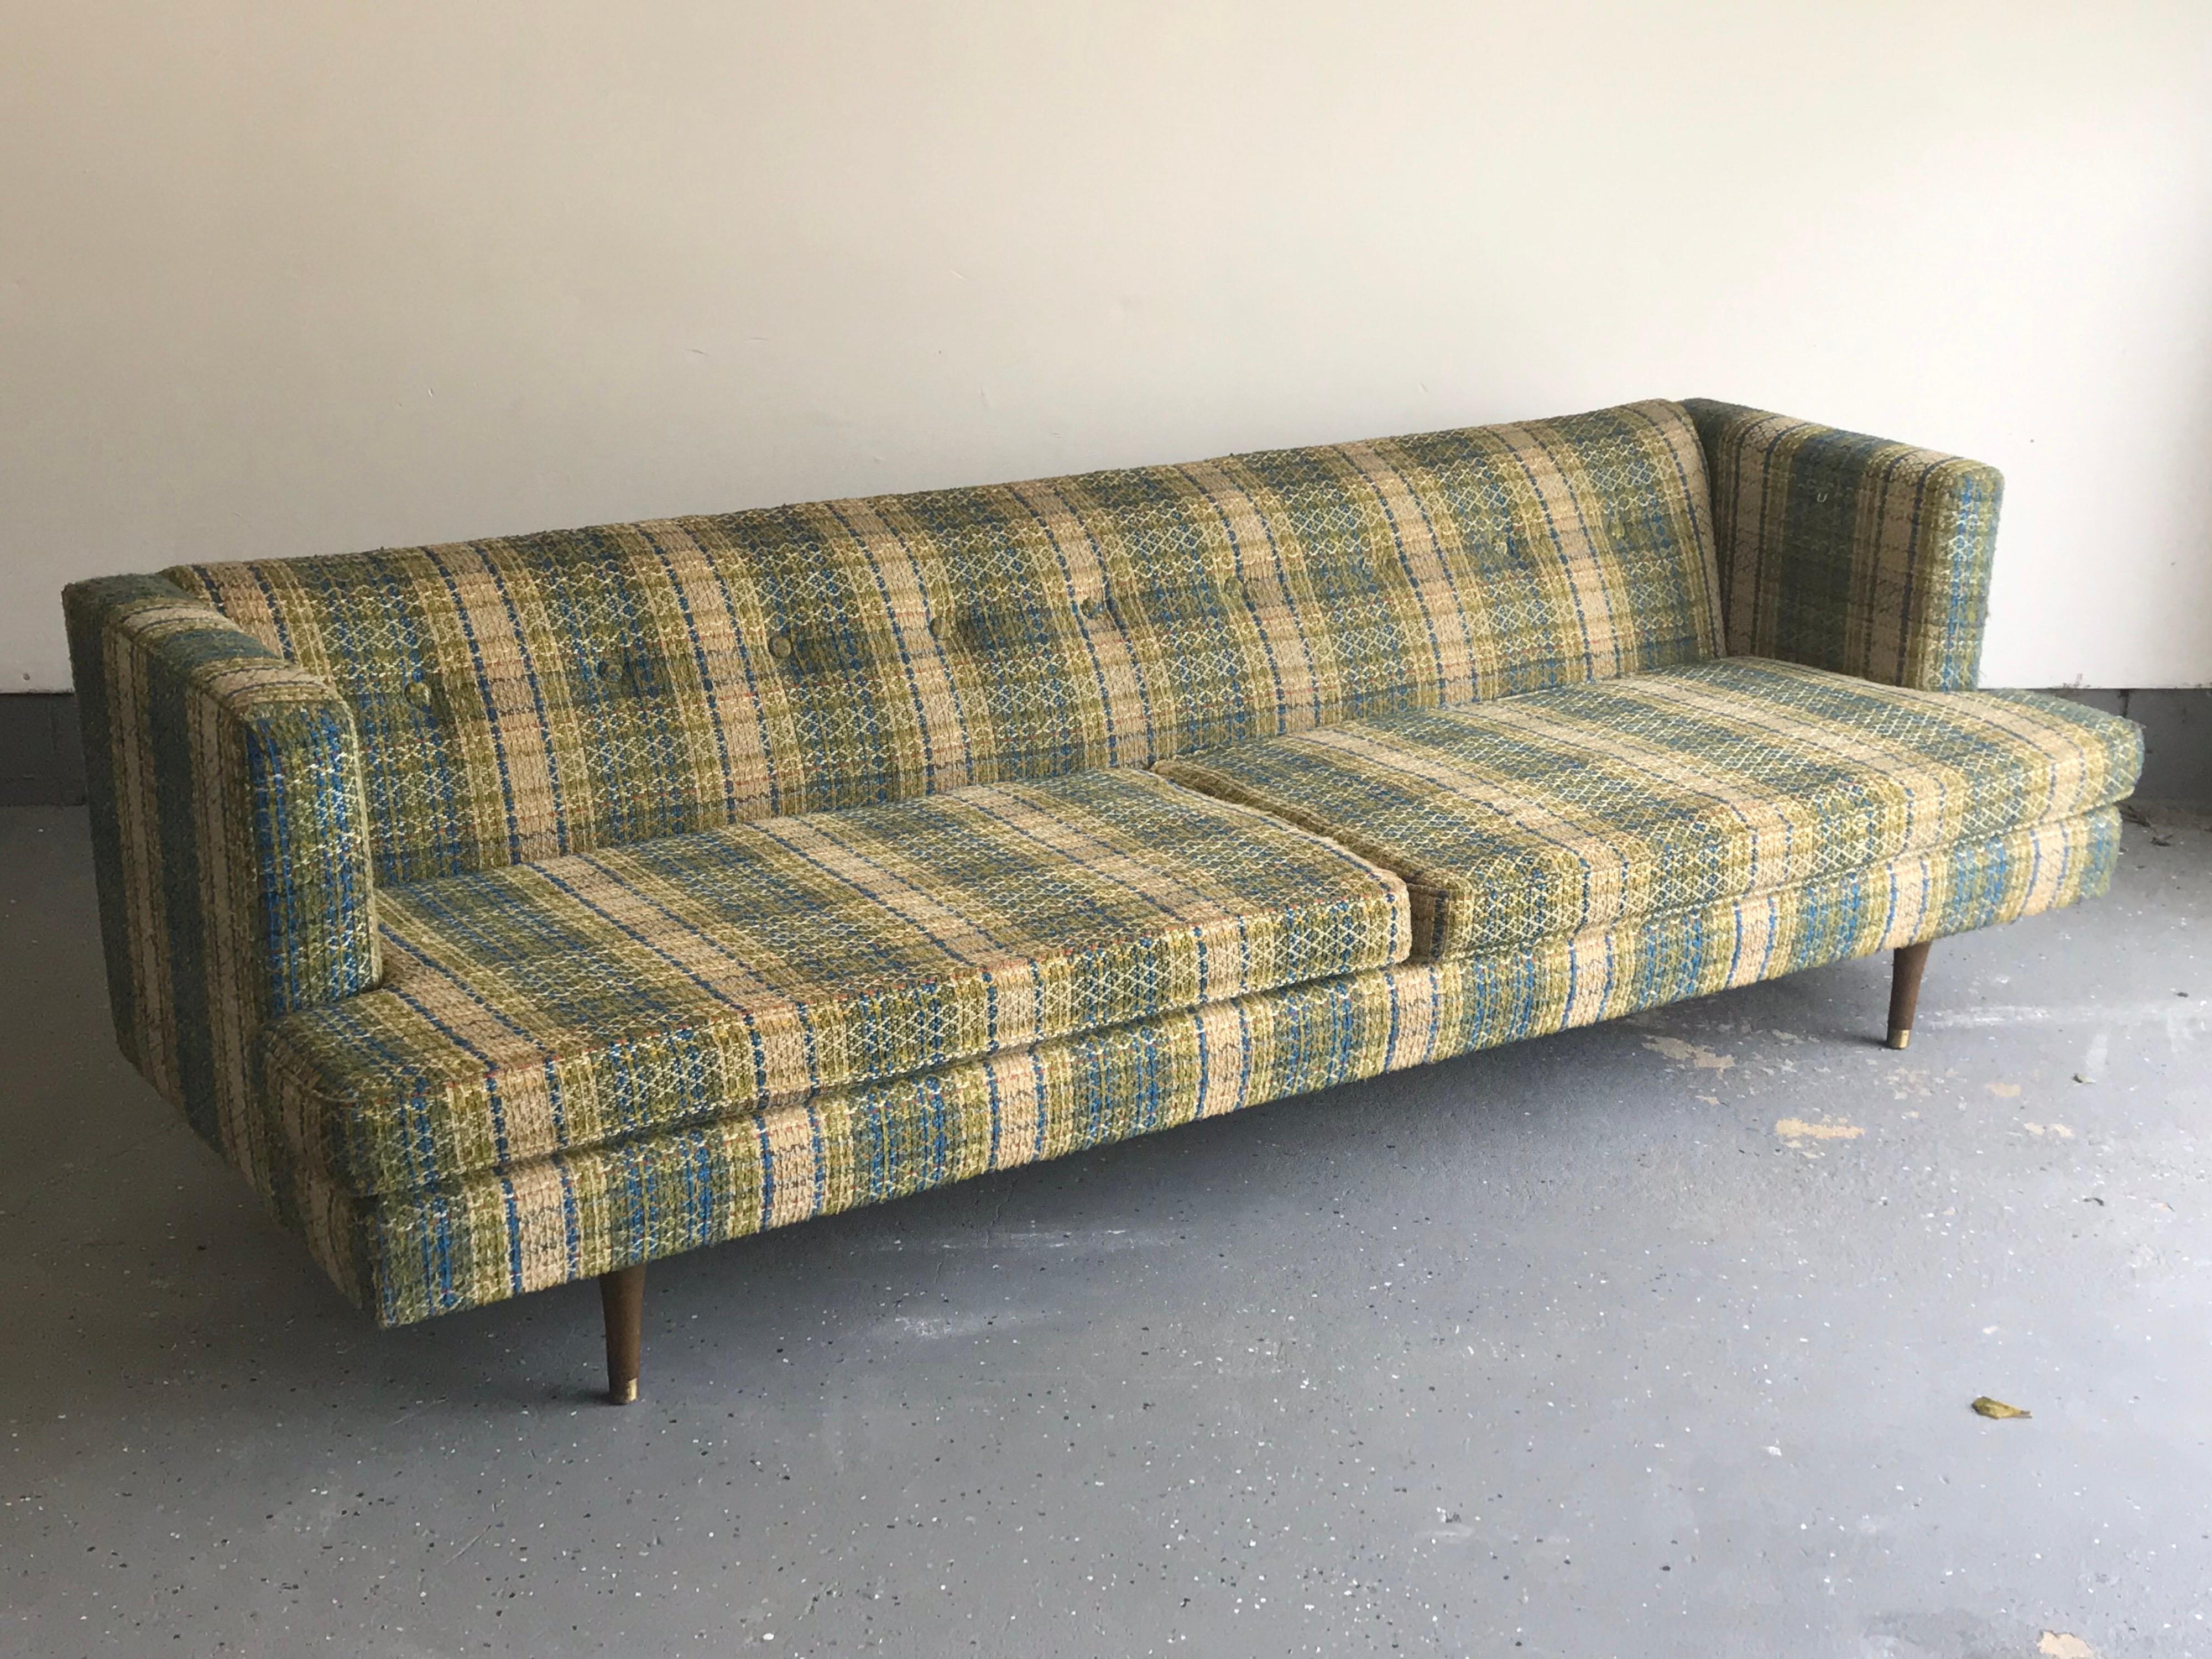 Iconic sofa designed by Edward Wormley for Dunbar. Features even height arms, button back, and brass capped tapered mahogany legs. Extremely well built sofa. Sofa was reupholstered into the 1960s.

Upholstery is relatively clean for the age,